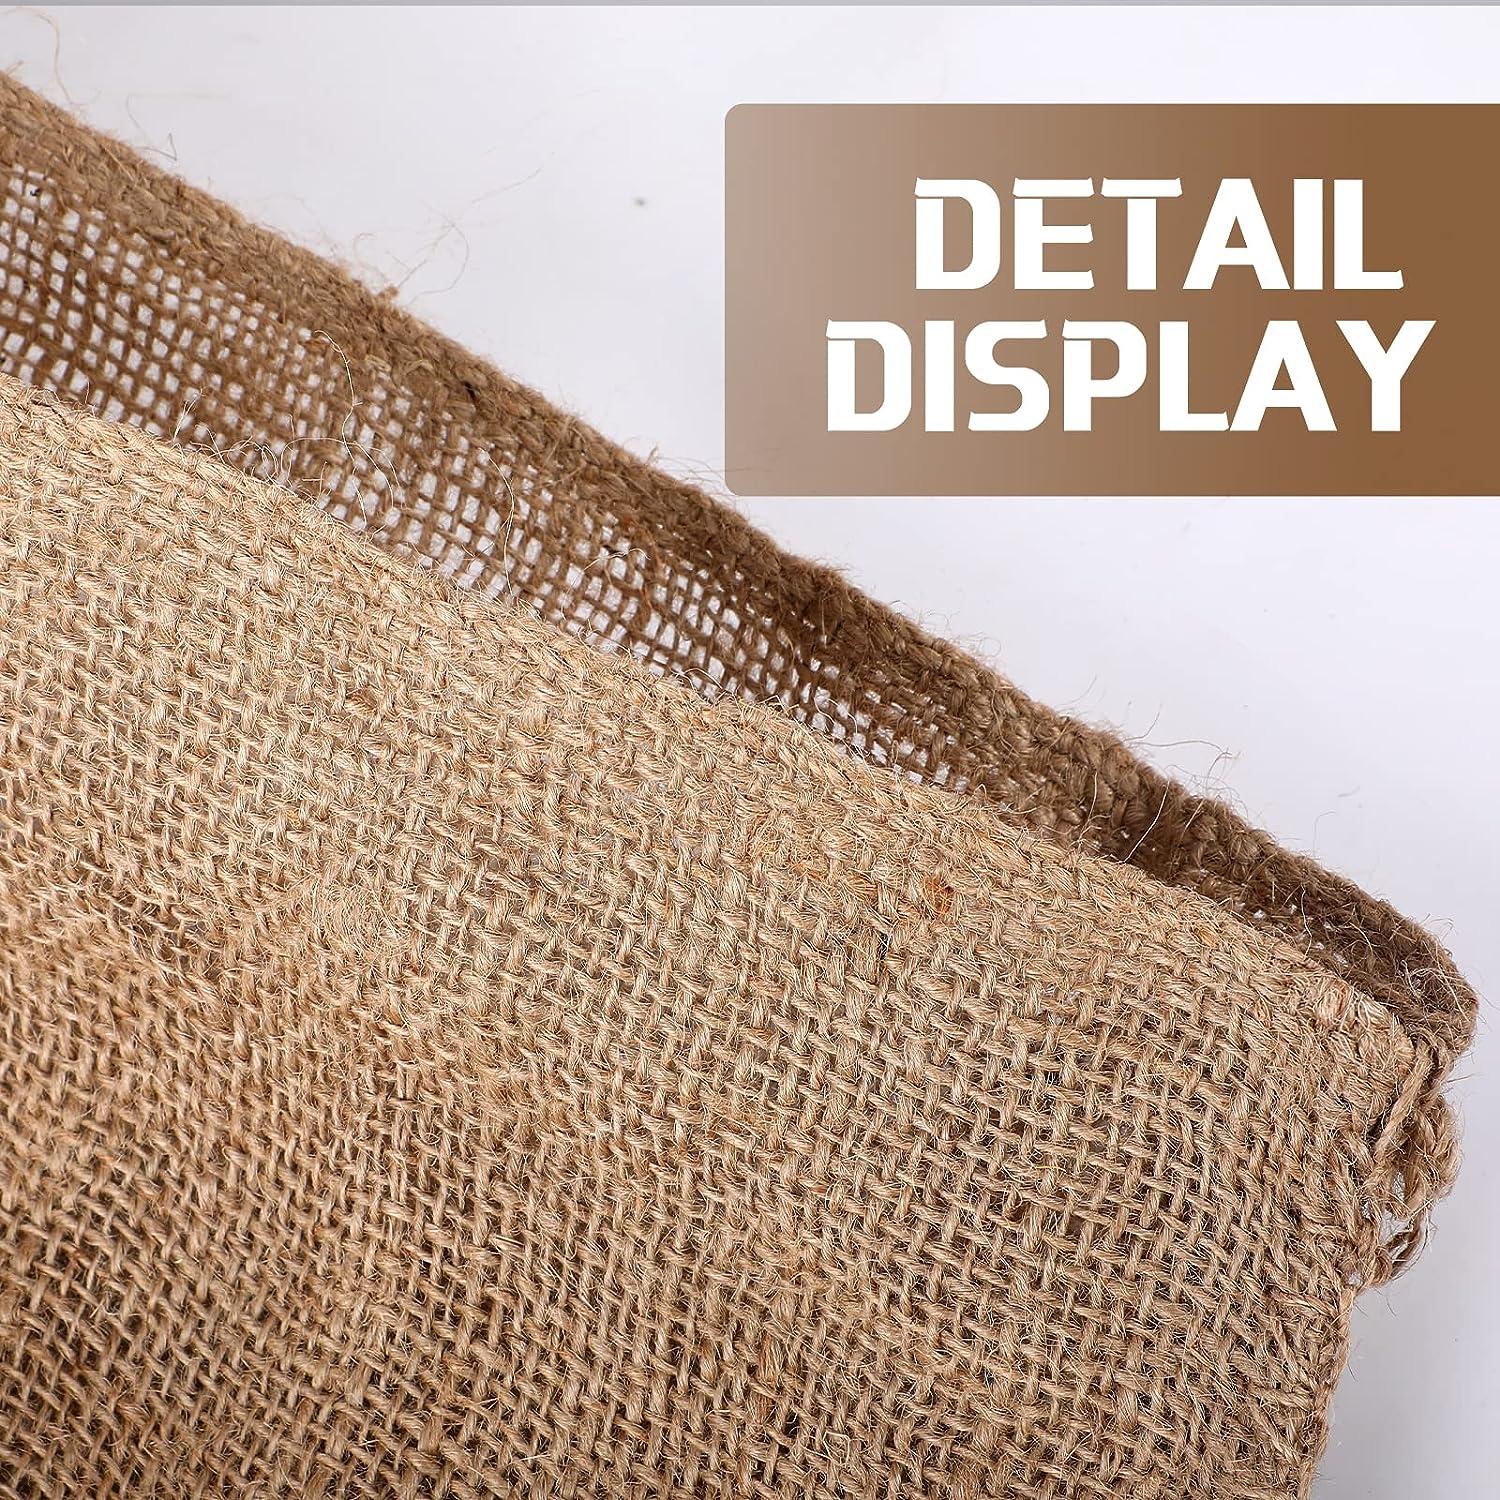 Shappy 10 Pieces Burlap Sand Bag 14 x 26 Empty Sand Bags with Solid Tie  Flood Control Bag Water Barrier Sandbag for Flooding Moving House, Store